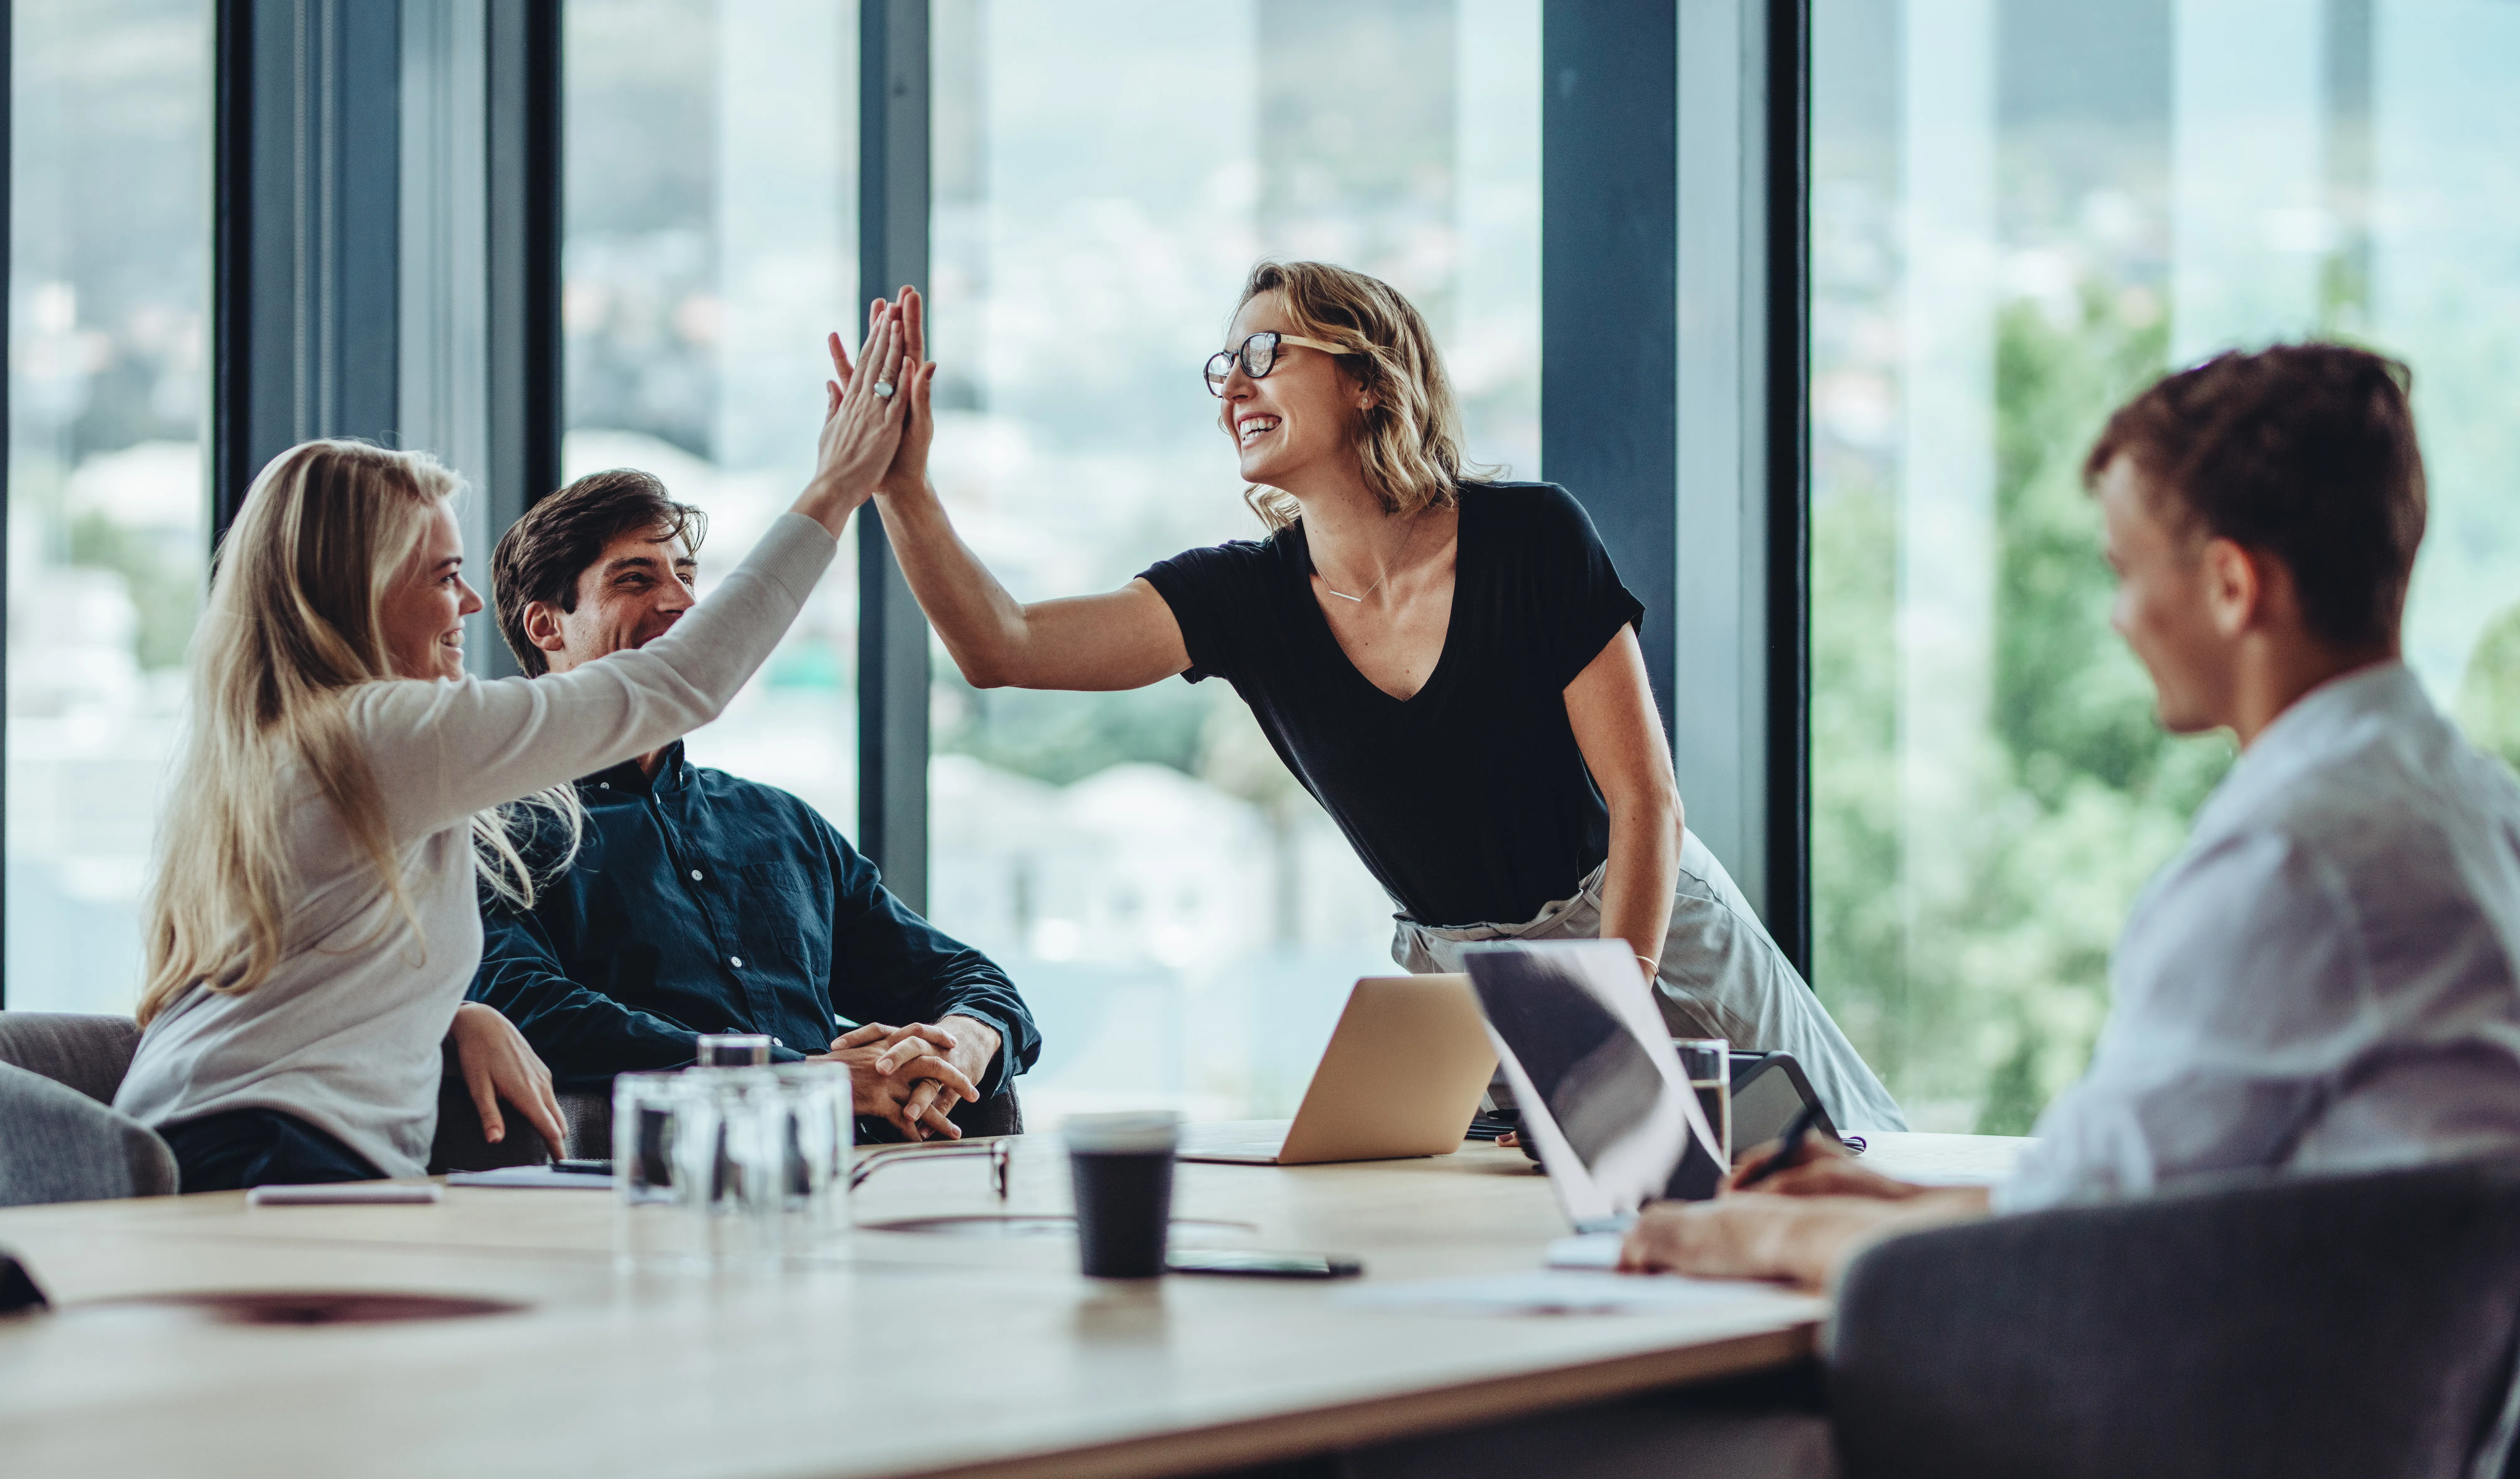 HR Leaders Build Connection in the Modern Workplace